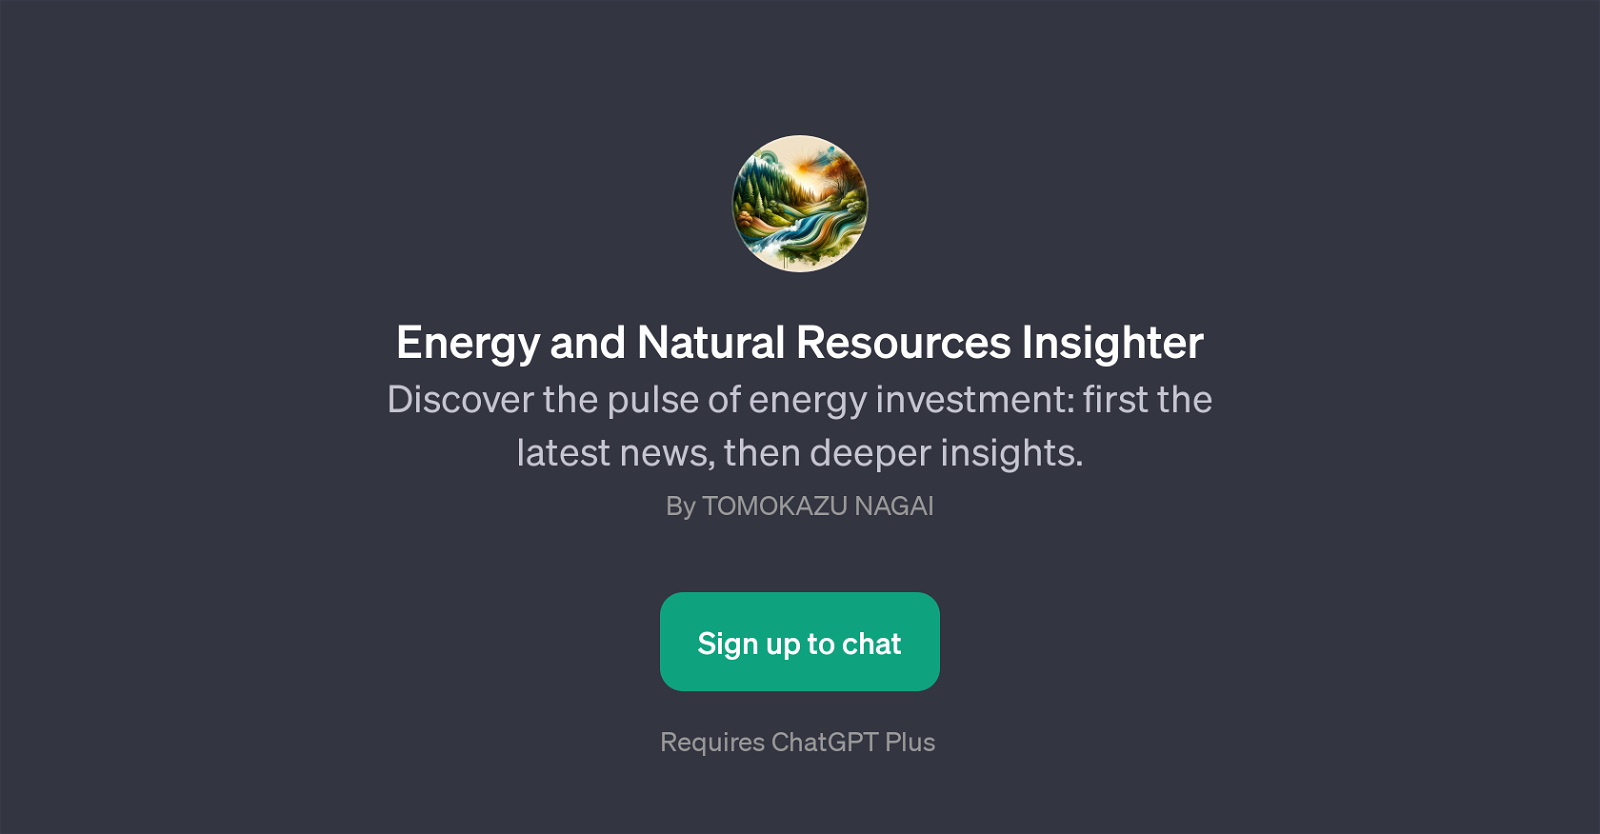 Energy and Natural Resources Insighter website